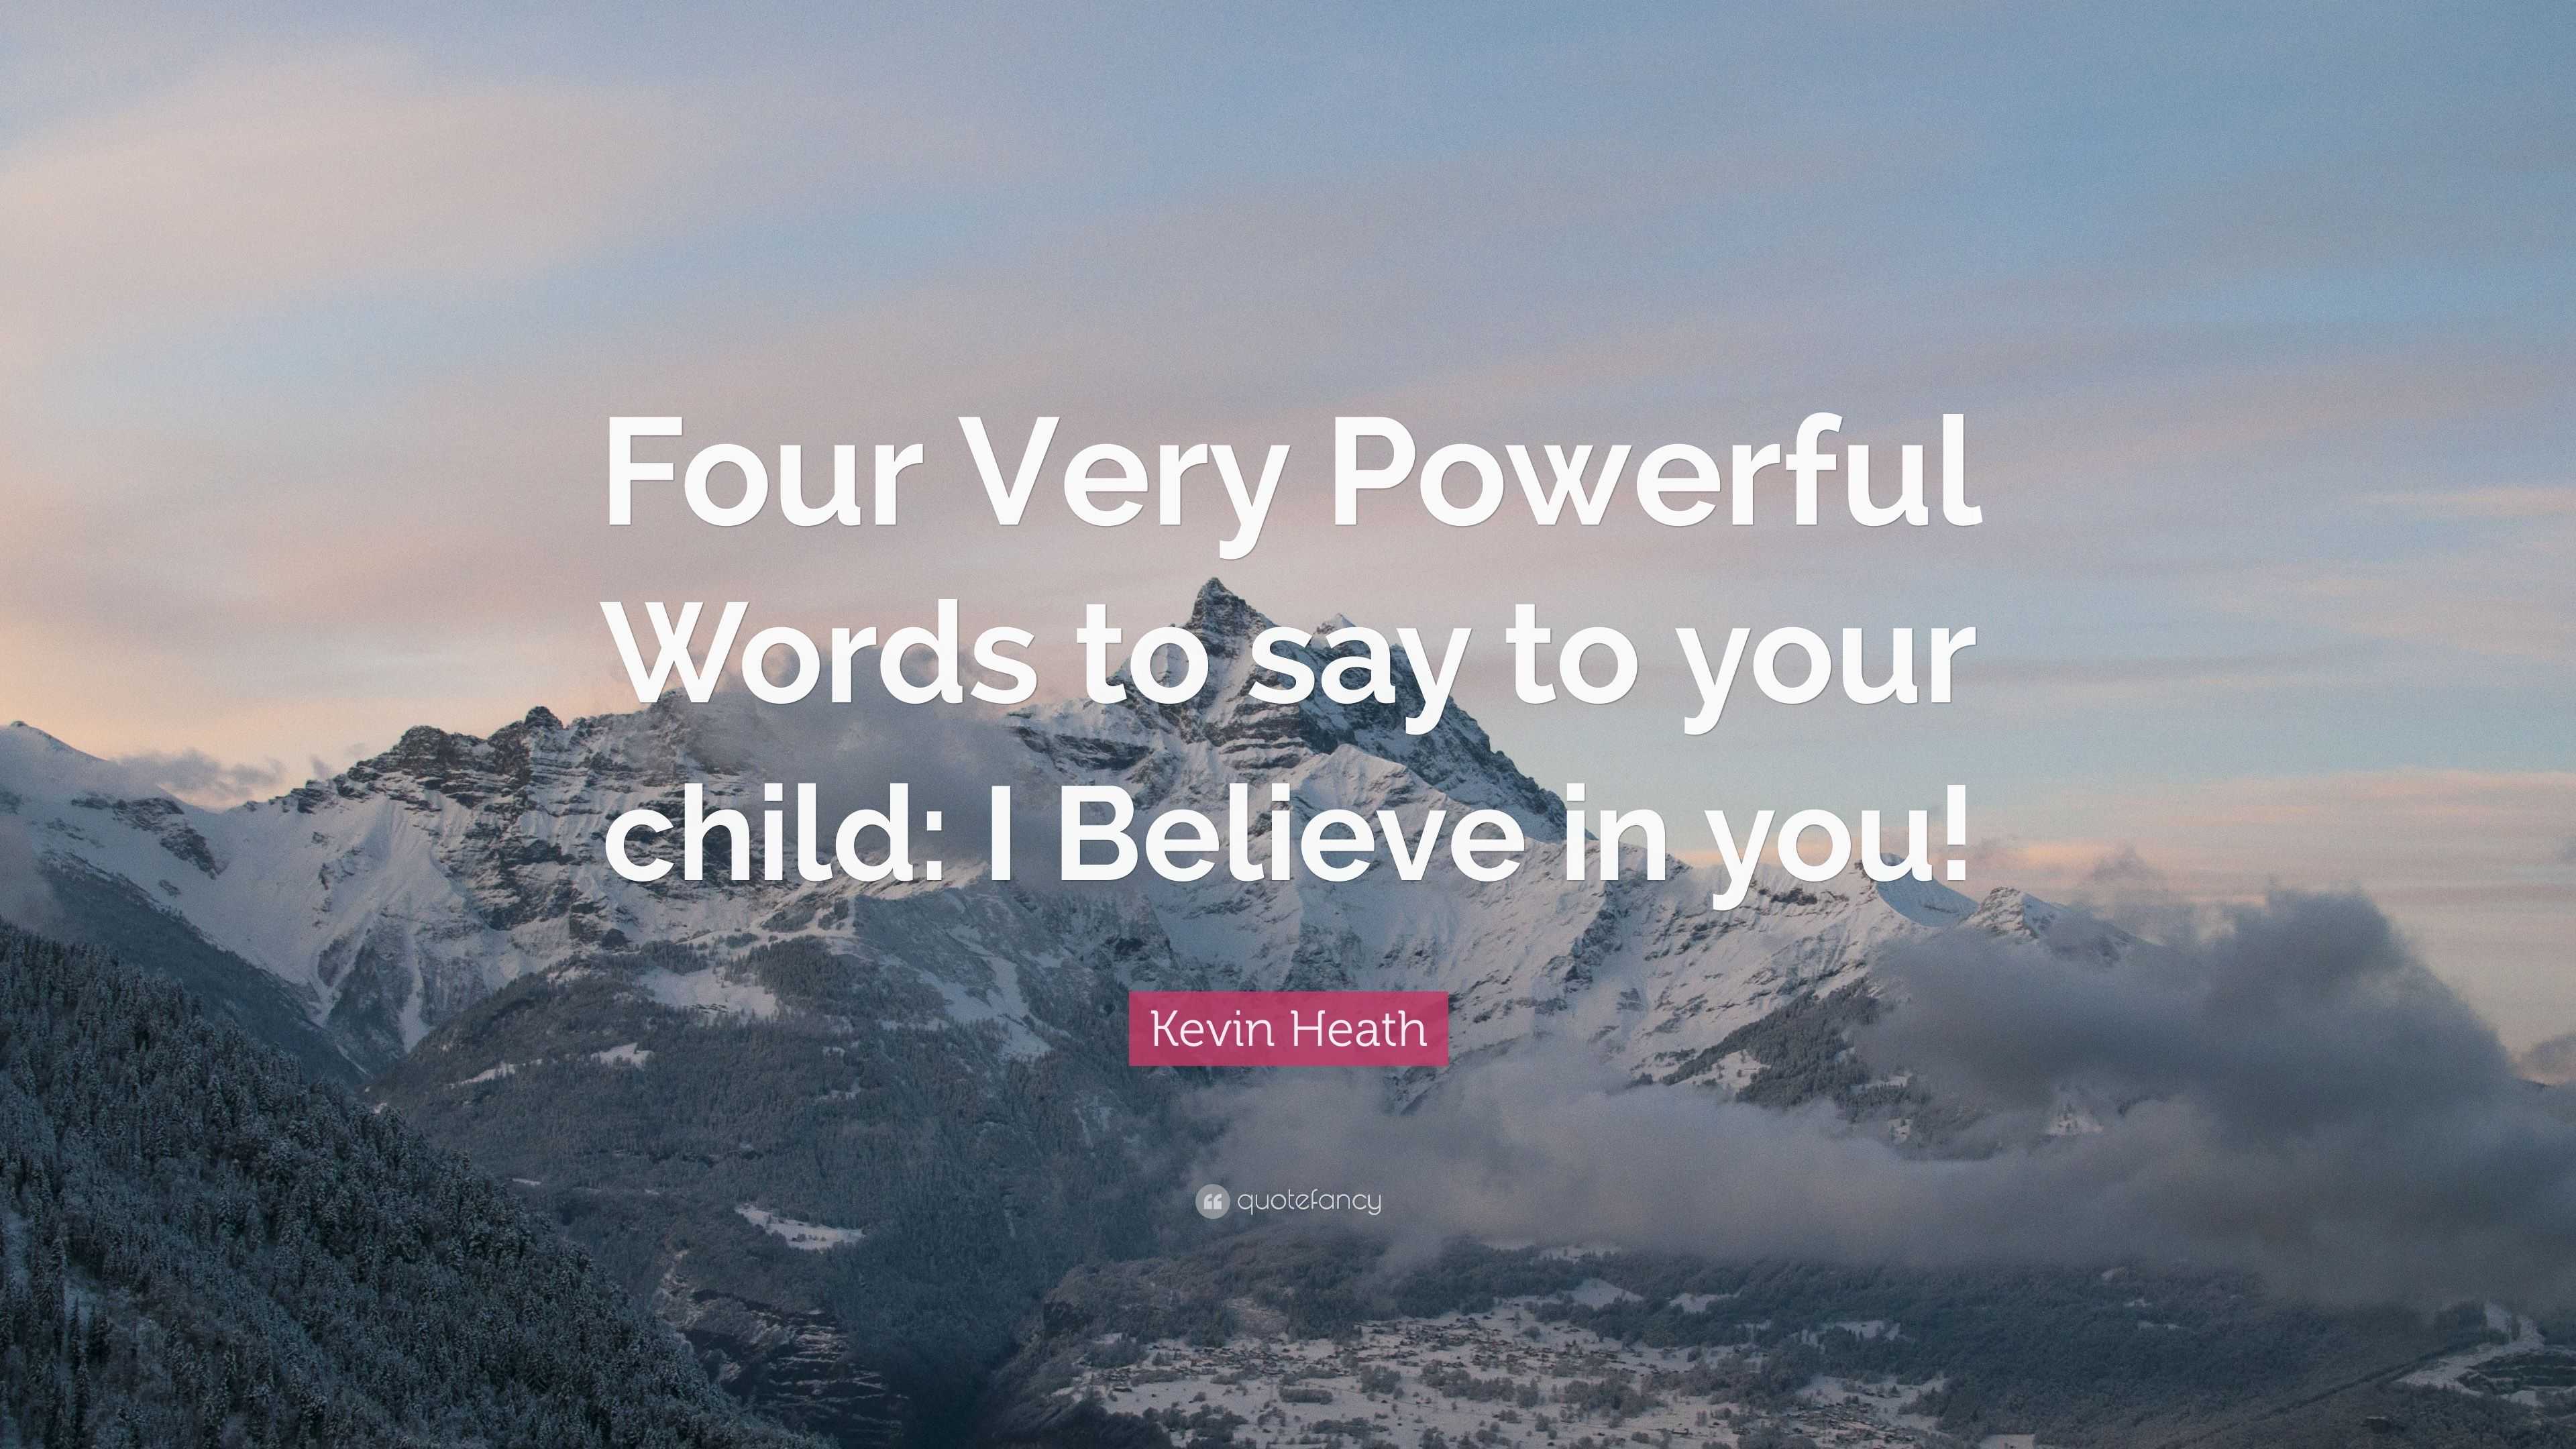 https://quotefancy.com/media/wallpaper/3840x2160/4876373-Kevin-Heath-Quote-Four-Very-Powerful-Words-to-say-to-your-child-I.jpg